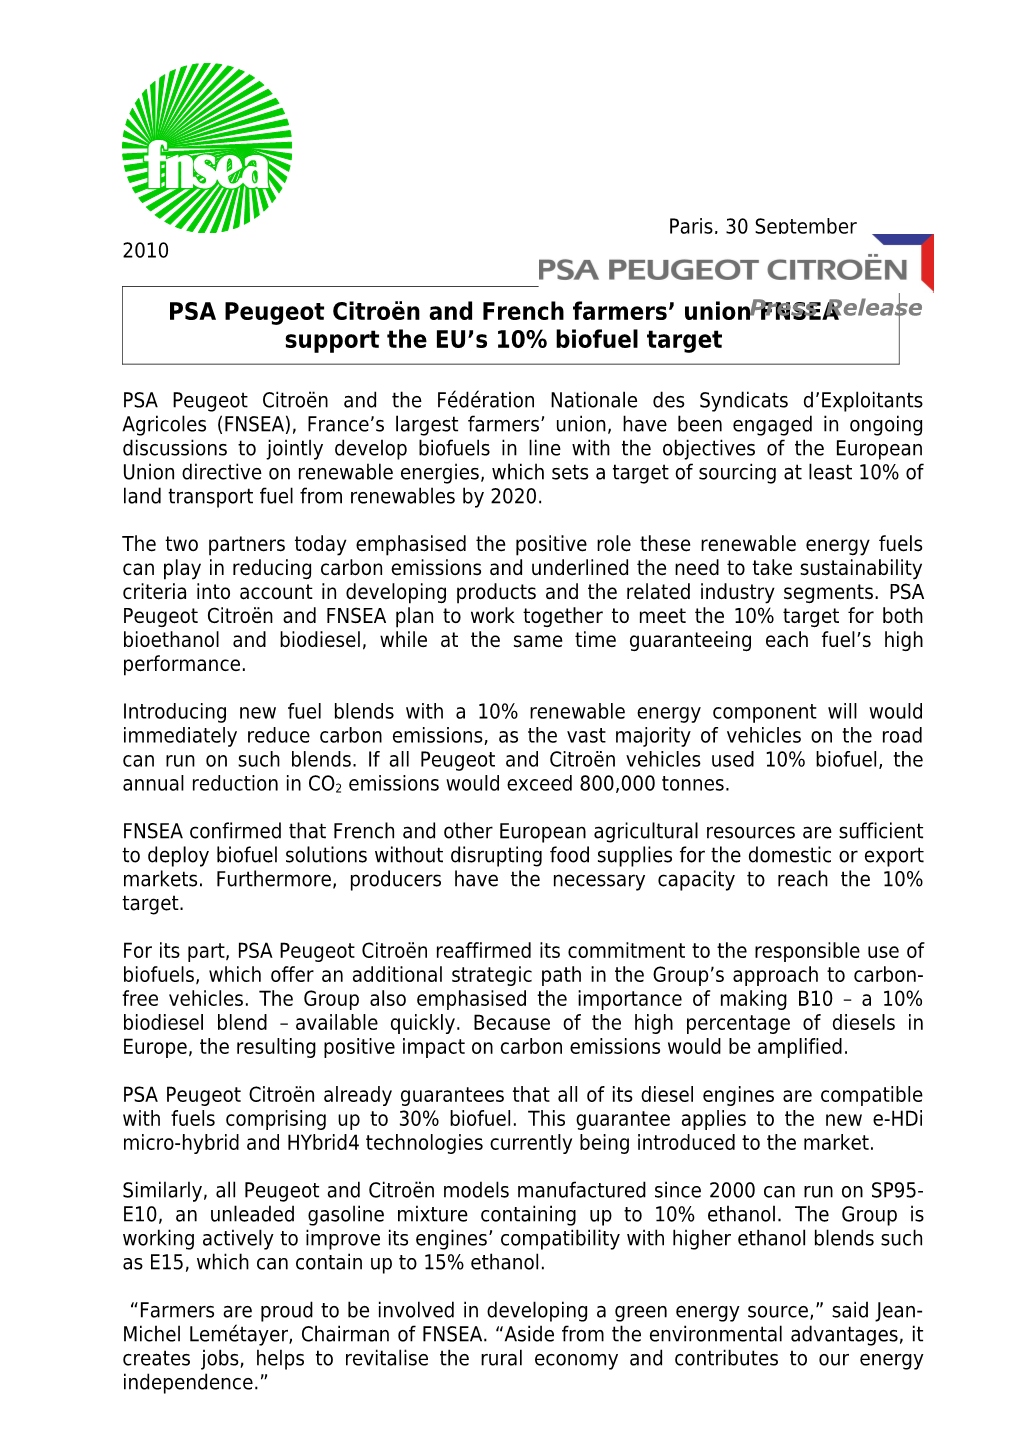 PSA Peugeot Citroën and French Farmers Union FNSEA